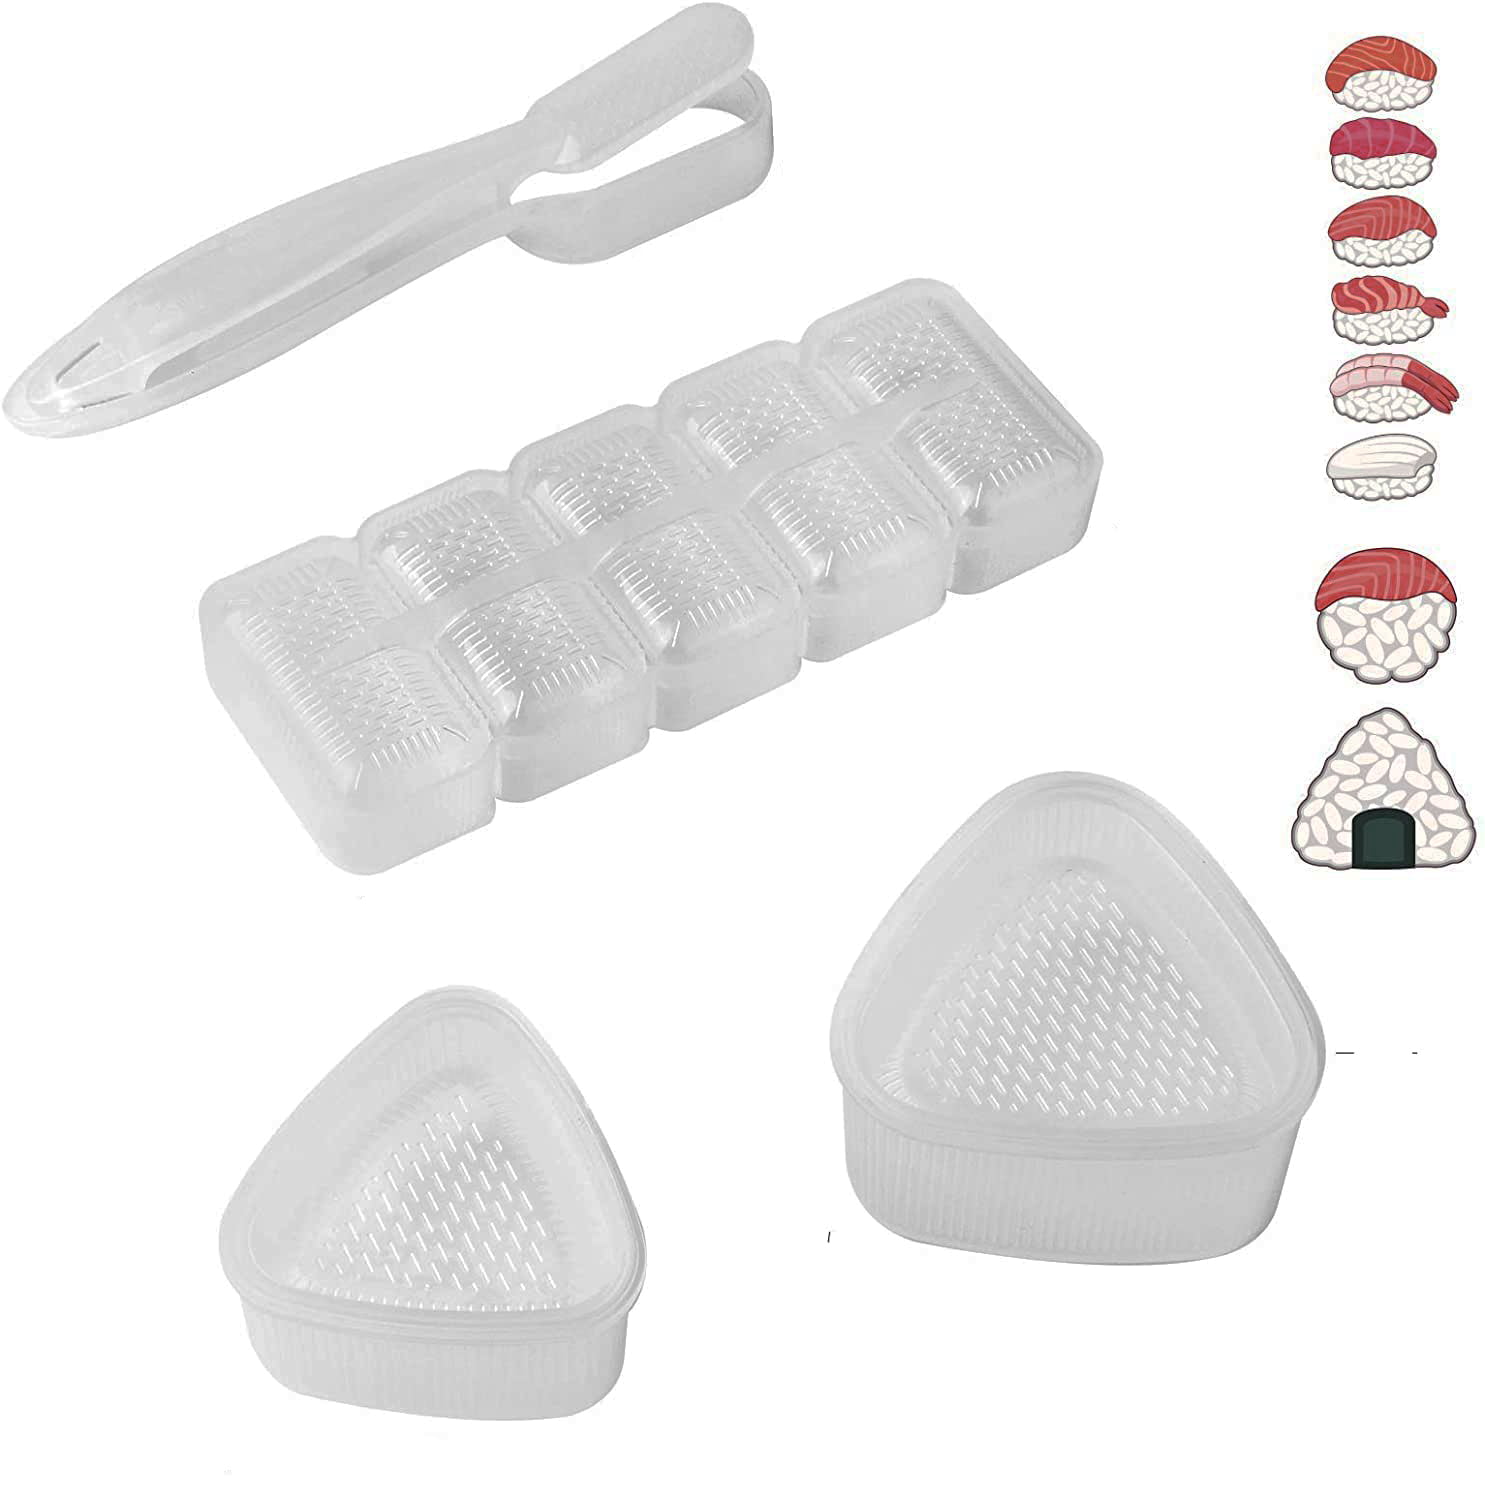 AYCCNH 6 in 1 Sushi Maker Box,Multifunctional  Triangle-Heart-Triangle Sushi Mold for Sushi Making and Storage (Gray):  Sushi Plates